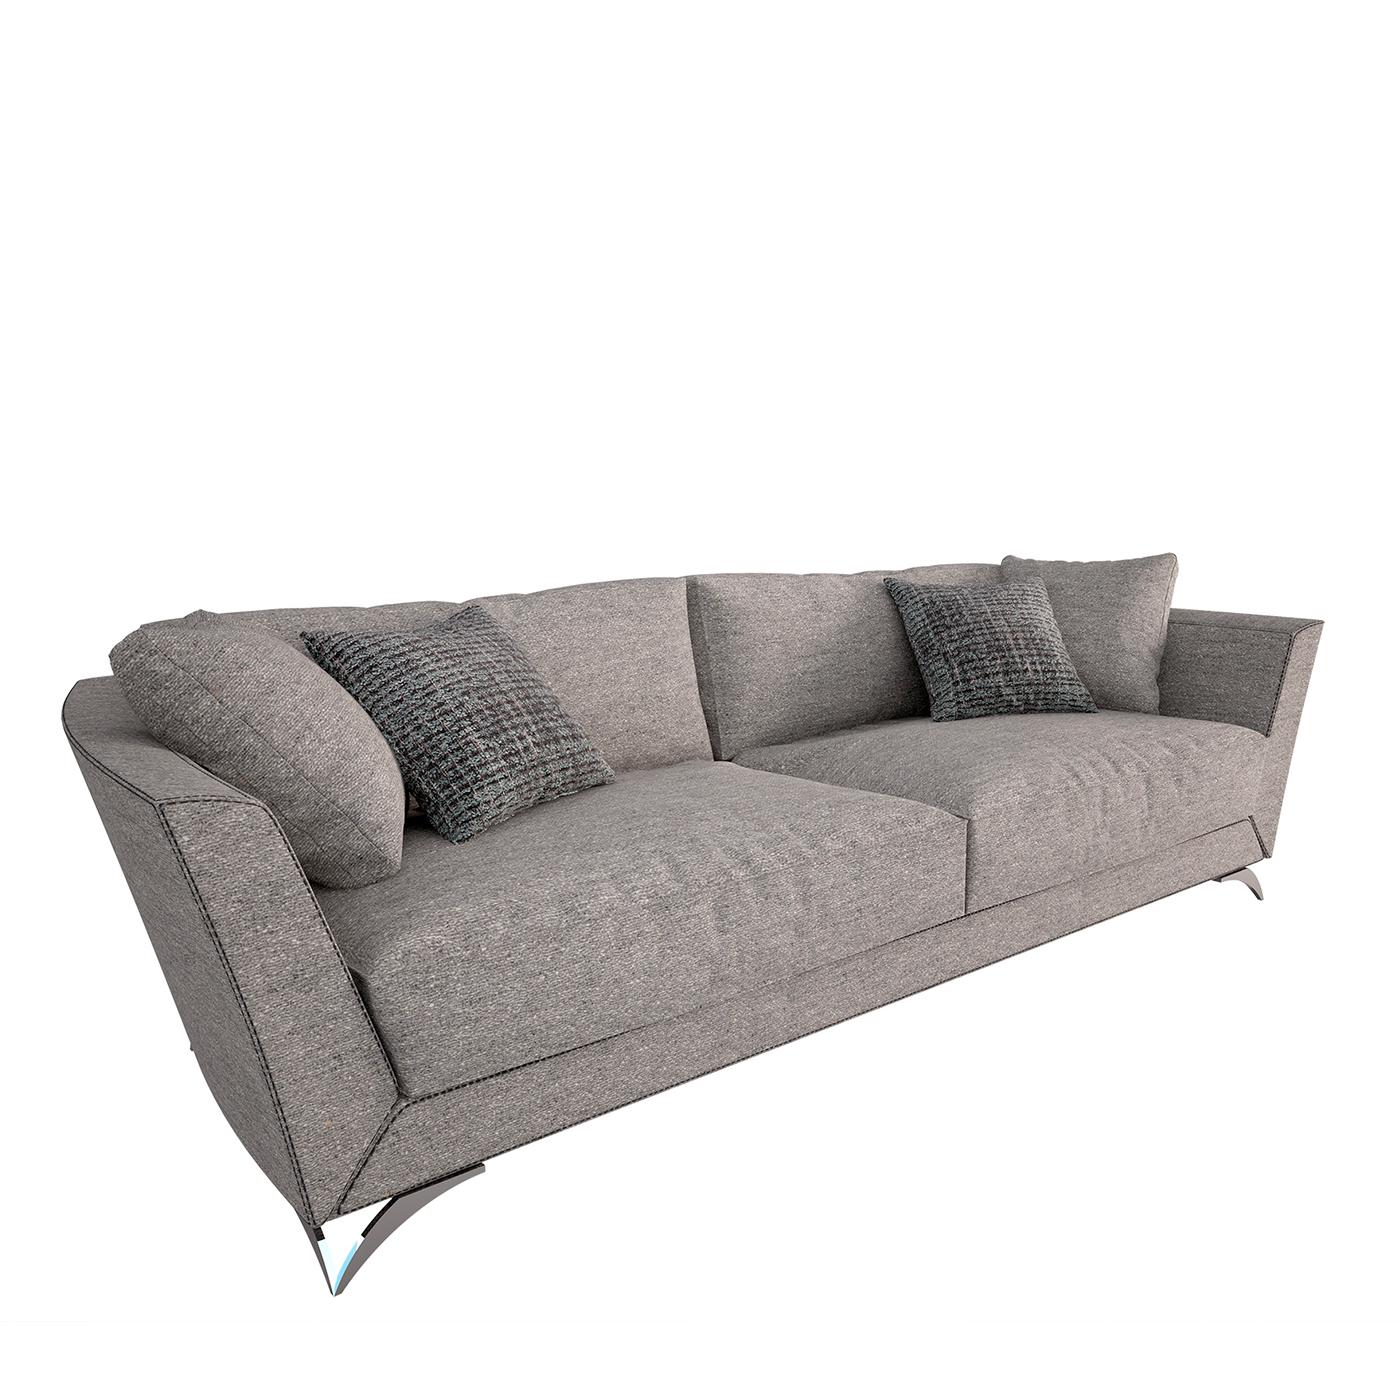 Named after modernist poet Eliot, this excellent sofa will create a captivating focal point in a contemporary interior, especially when combined with the Eliot armchair by Meroni. Defined by a strongly geometric profile with flared armrests and